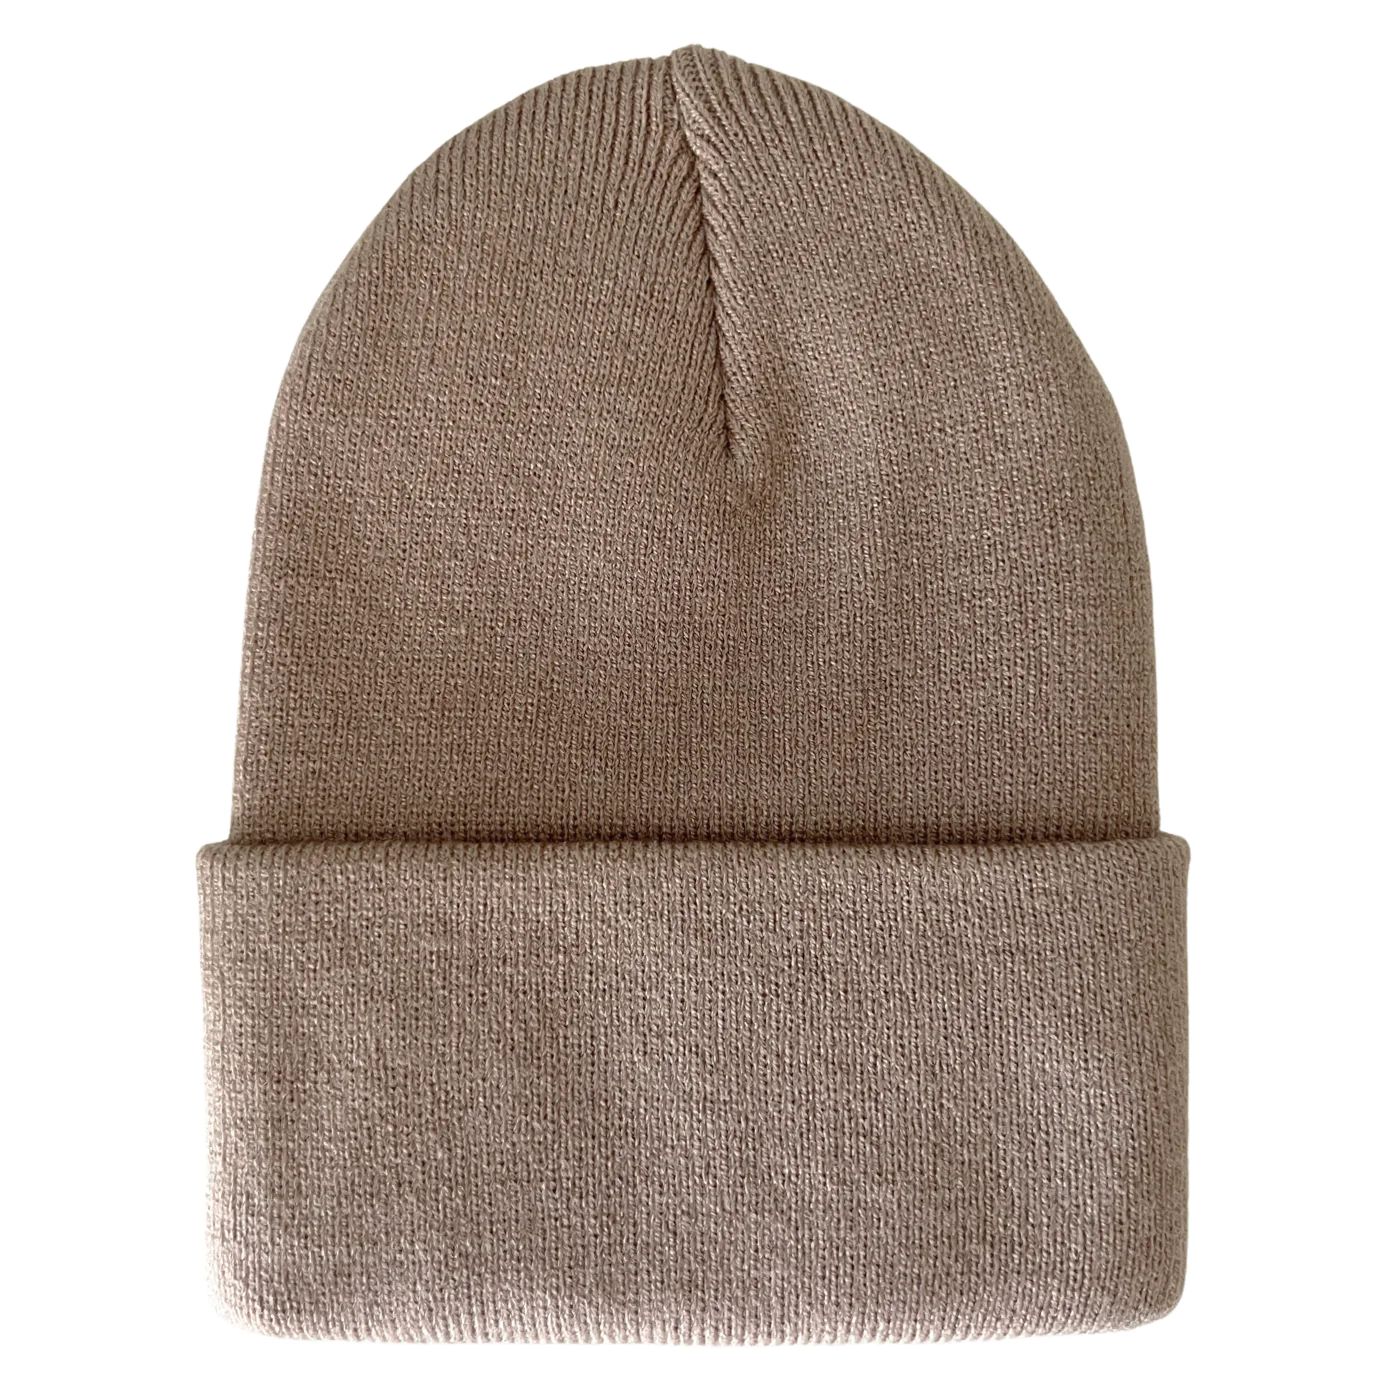 Baby's First Hat, Tan | SpearmintLOVE